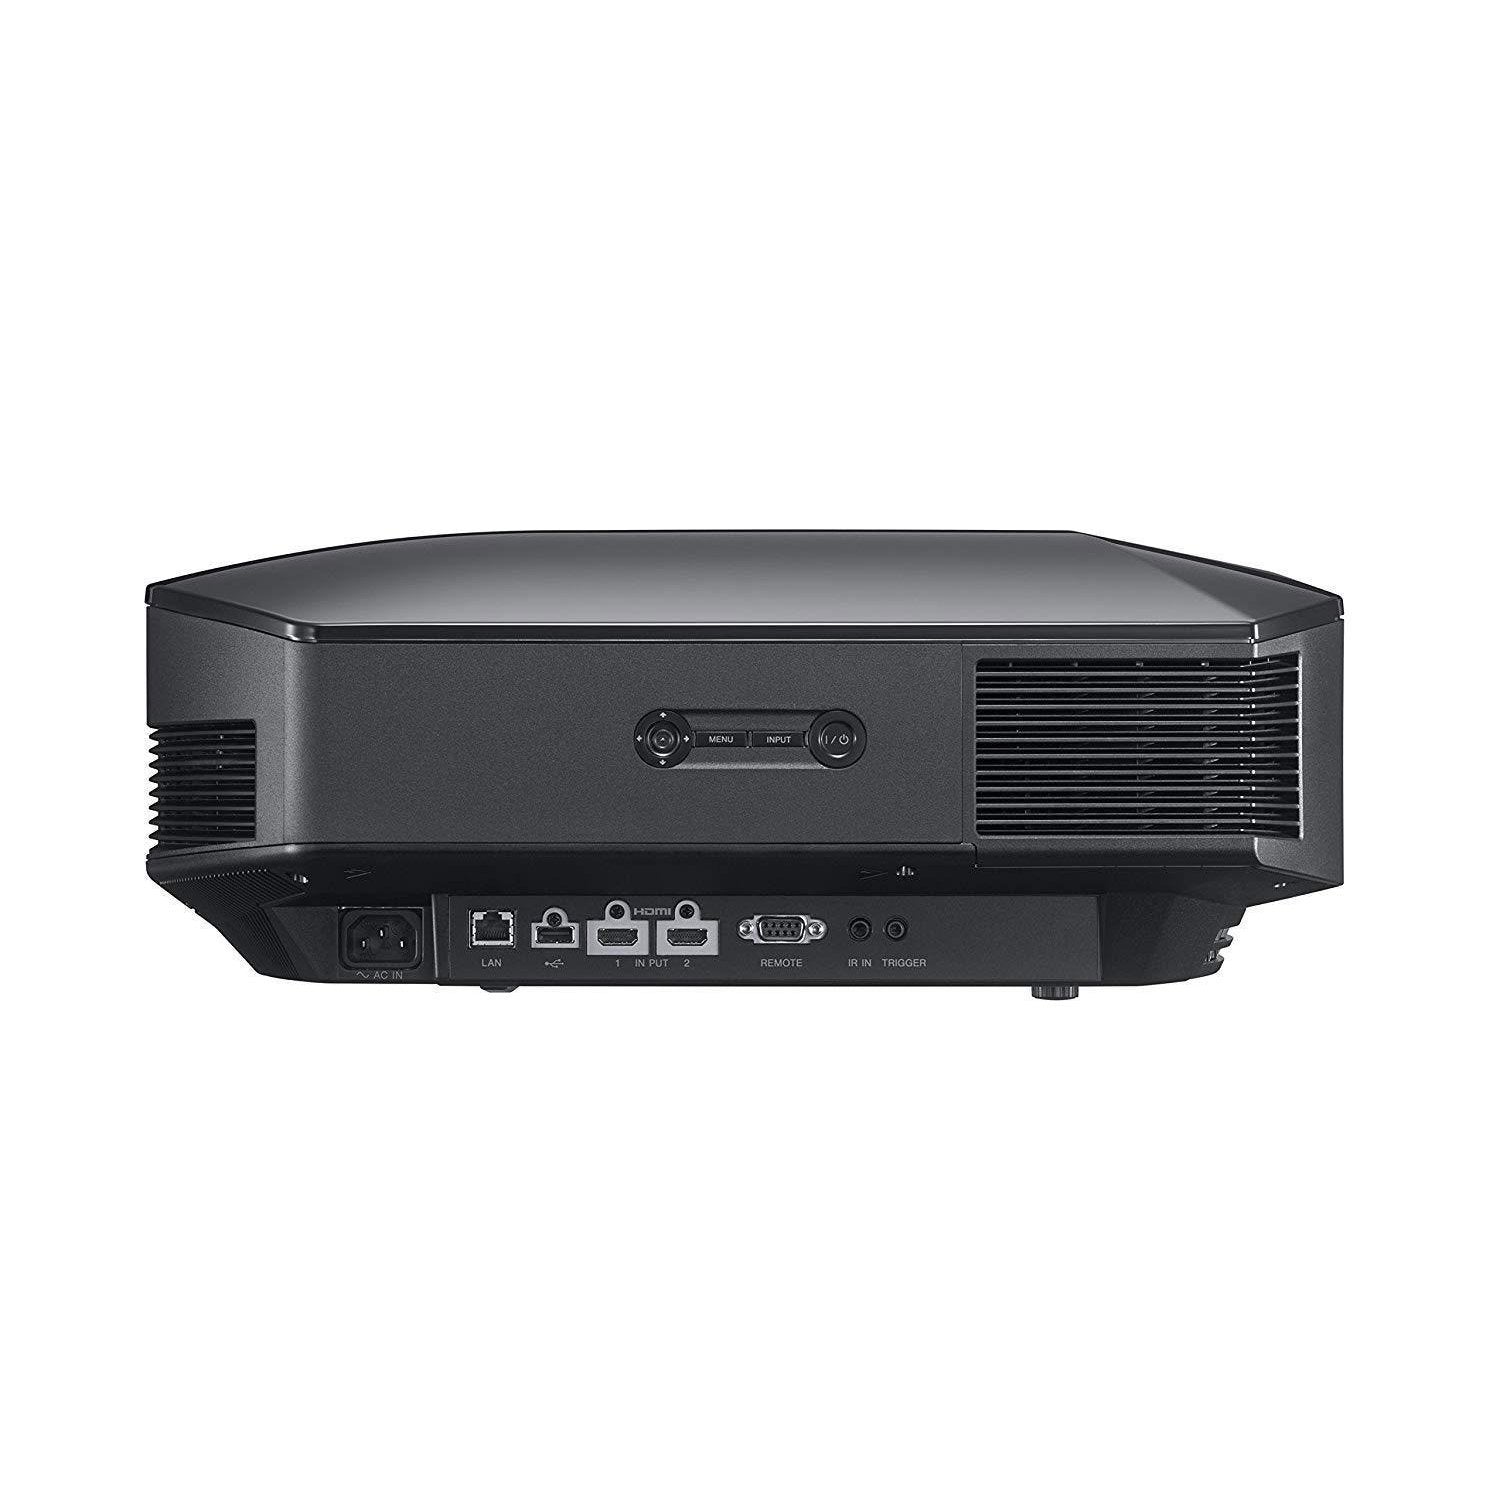 Sony VPLHW65ES 1080p 3D Home Theater Projector